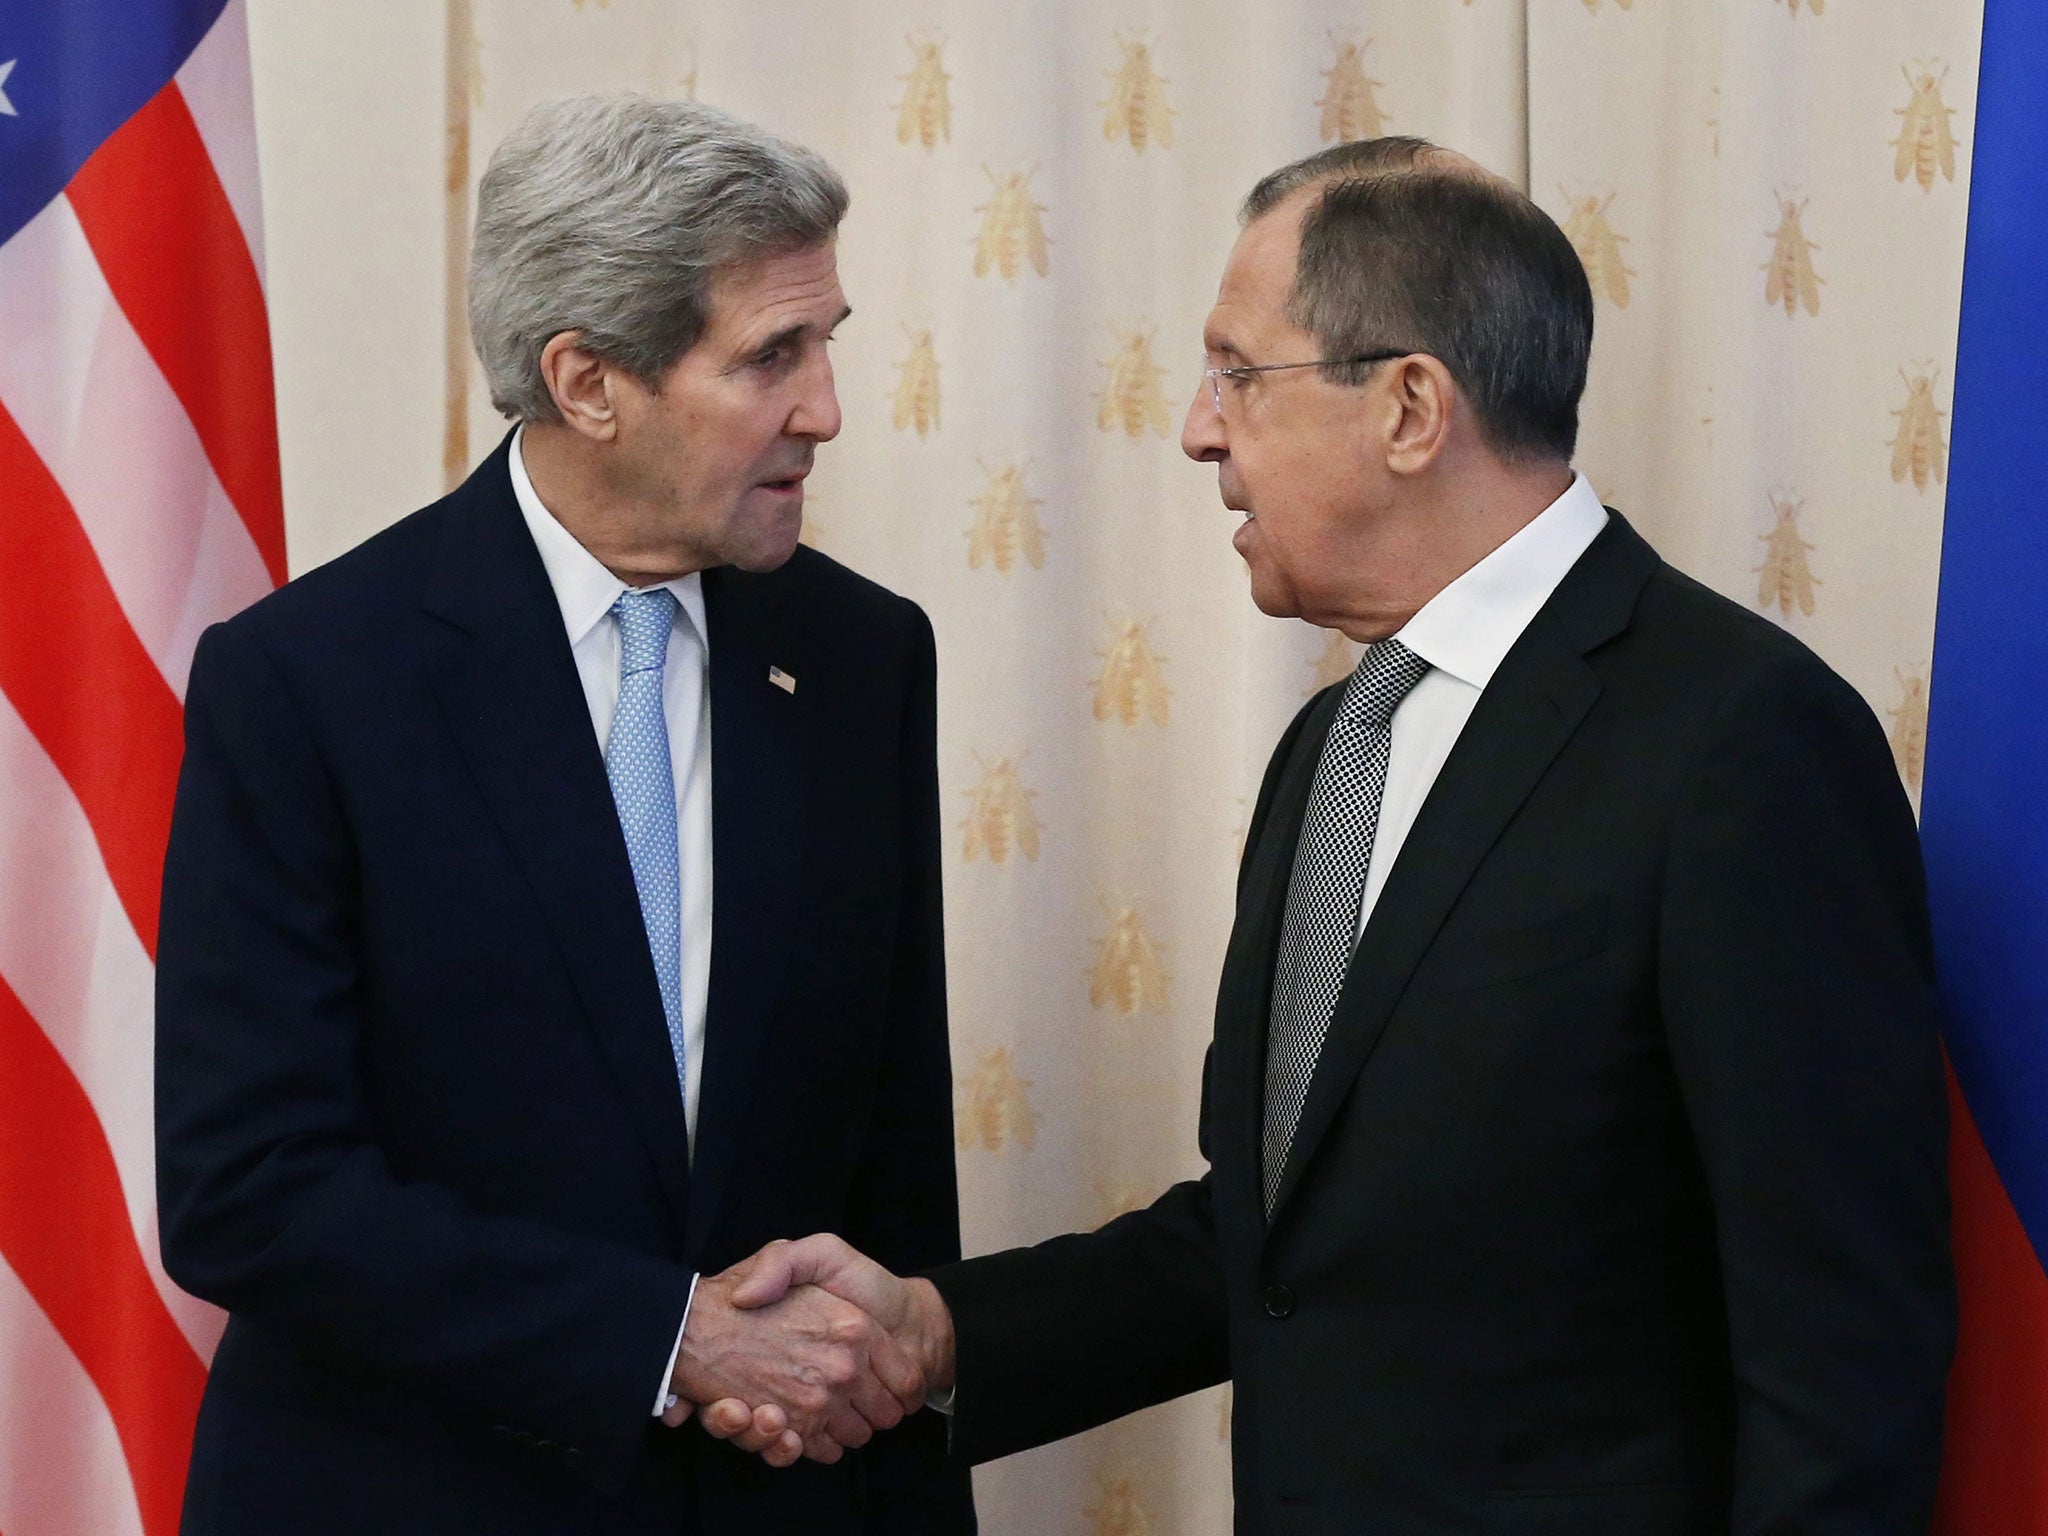 US Secretary of State John Kerry (L) meets with Russian Foreign Minister Sergei Lavrov (R), in Moscow, Russia, 15 December 2015